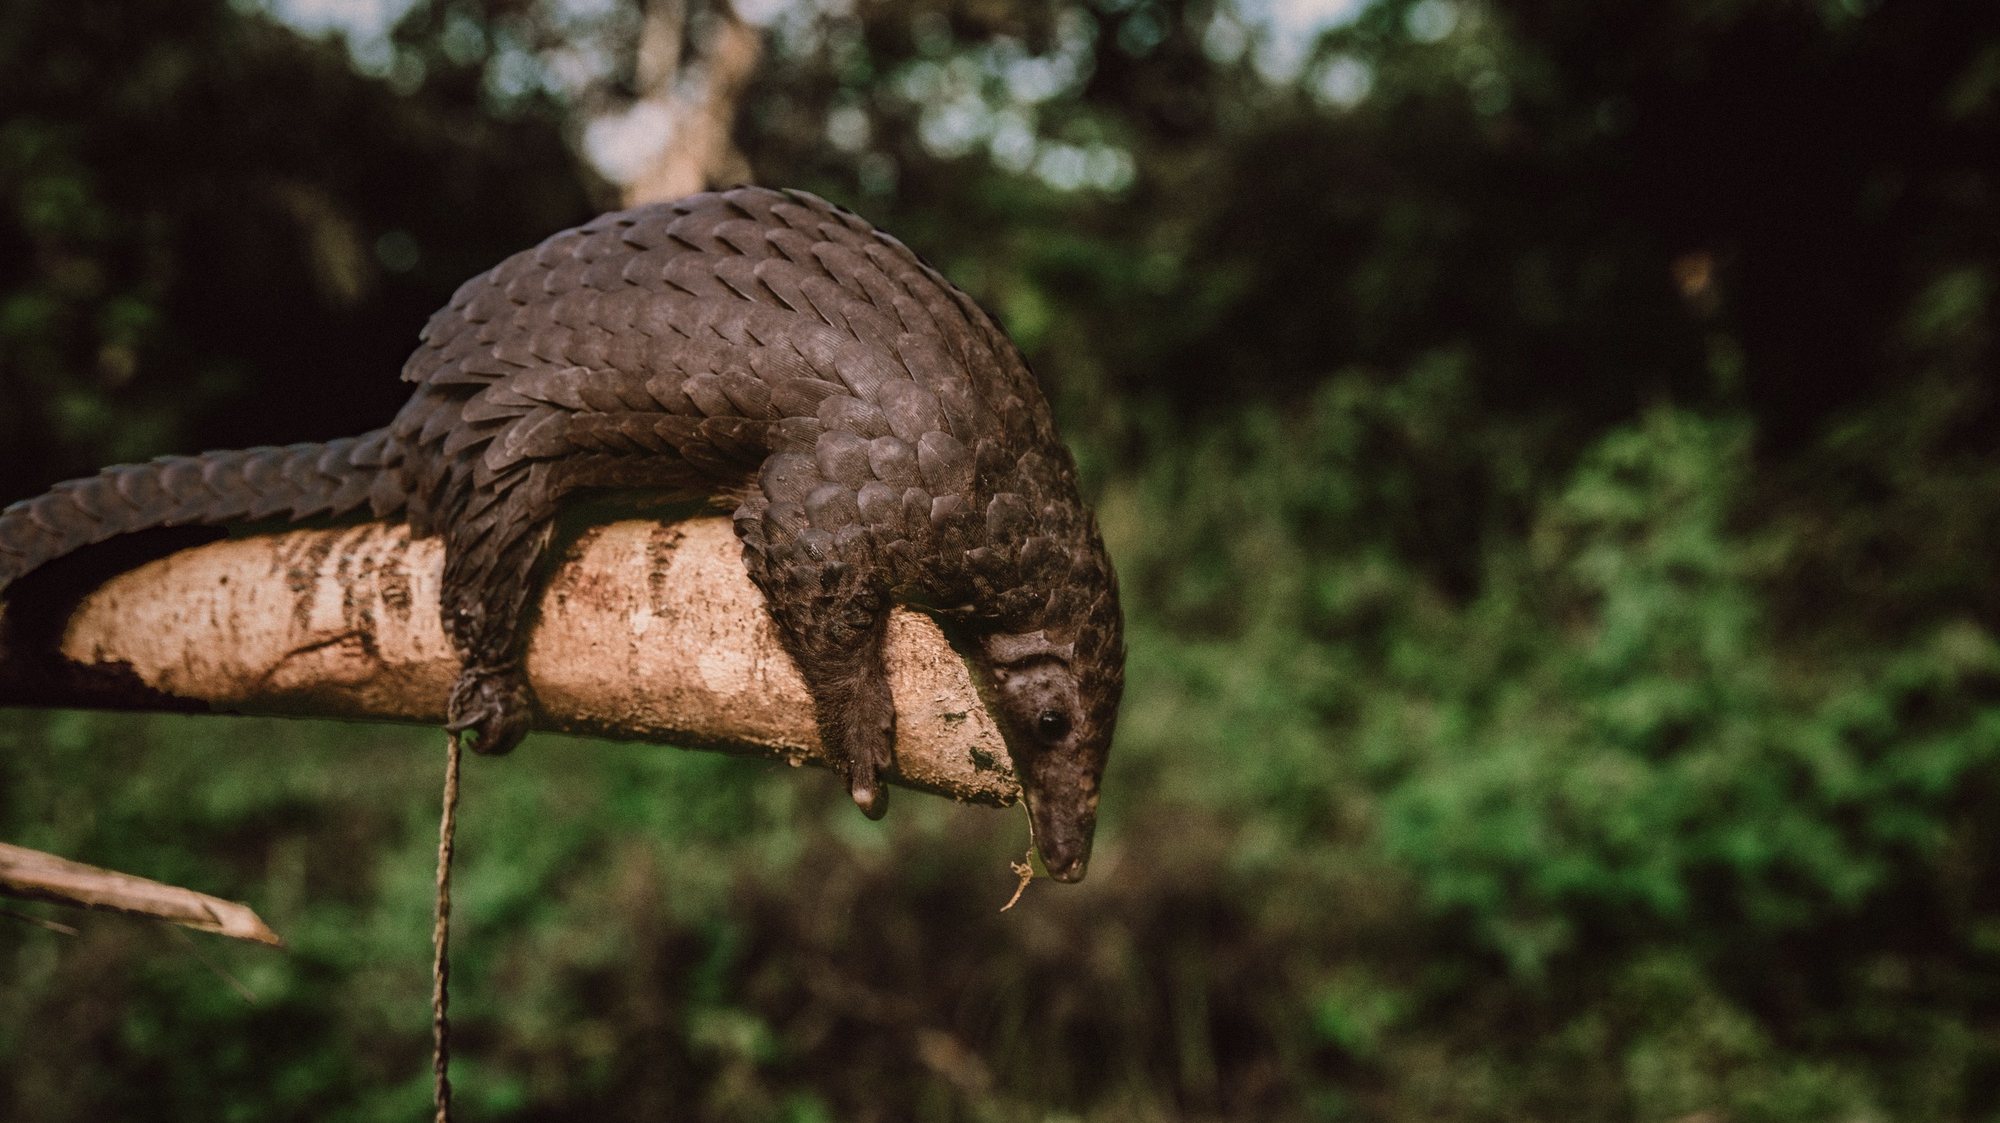 epa08891316 (07/39) A pangolin captured by hunters in the Ituri rainforest, in Mambasa territory, Democratic Republic of the Congo, 19 October 2020. The risk of a new pathogen coming in contact with human populations is increased in areas with high biodiversity like Congo. Over 72 percent of the country lives on less than USD 1.90 a day, which makes free sources of food like hunting essential in parts of the country where hunting and fishing are a viable option. Human populations come into contact with animals and pathogens during activities such as hunting for food or the exotic animal trade and deforestation. With deforestation and habitat loss, animals are more likely to move into new areas and come into contact with human beings for the first time. Humans living in these high-risk areas have a far greater chance of becoming a &#039;patient zero&#039; for virus spillover than elsewhere. The exotic animal trade is also an attractive source of revenue as Congo still hosts many exotic animals, including pangolins, the mammal suspected to be a secondary host for COVID-19 before it spilled over into the human population. There exists a precarious situation where conservation is a losing battle due to governance factors, and Congo’s biodiversity posits a distinct likelihood for a new virus to jump from an animal to a human population. Mammals alone are estimated to host at least 320,000 undiscovered viruses.  EPA/Hugh Kinsella Cunningham ATTENTION EDITORS / MANDATORY CREDIT : This story was produced in partnership with the Pulitzer Center -- For the full PHOTO ESSAY text please see Advisory Notice epa...